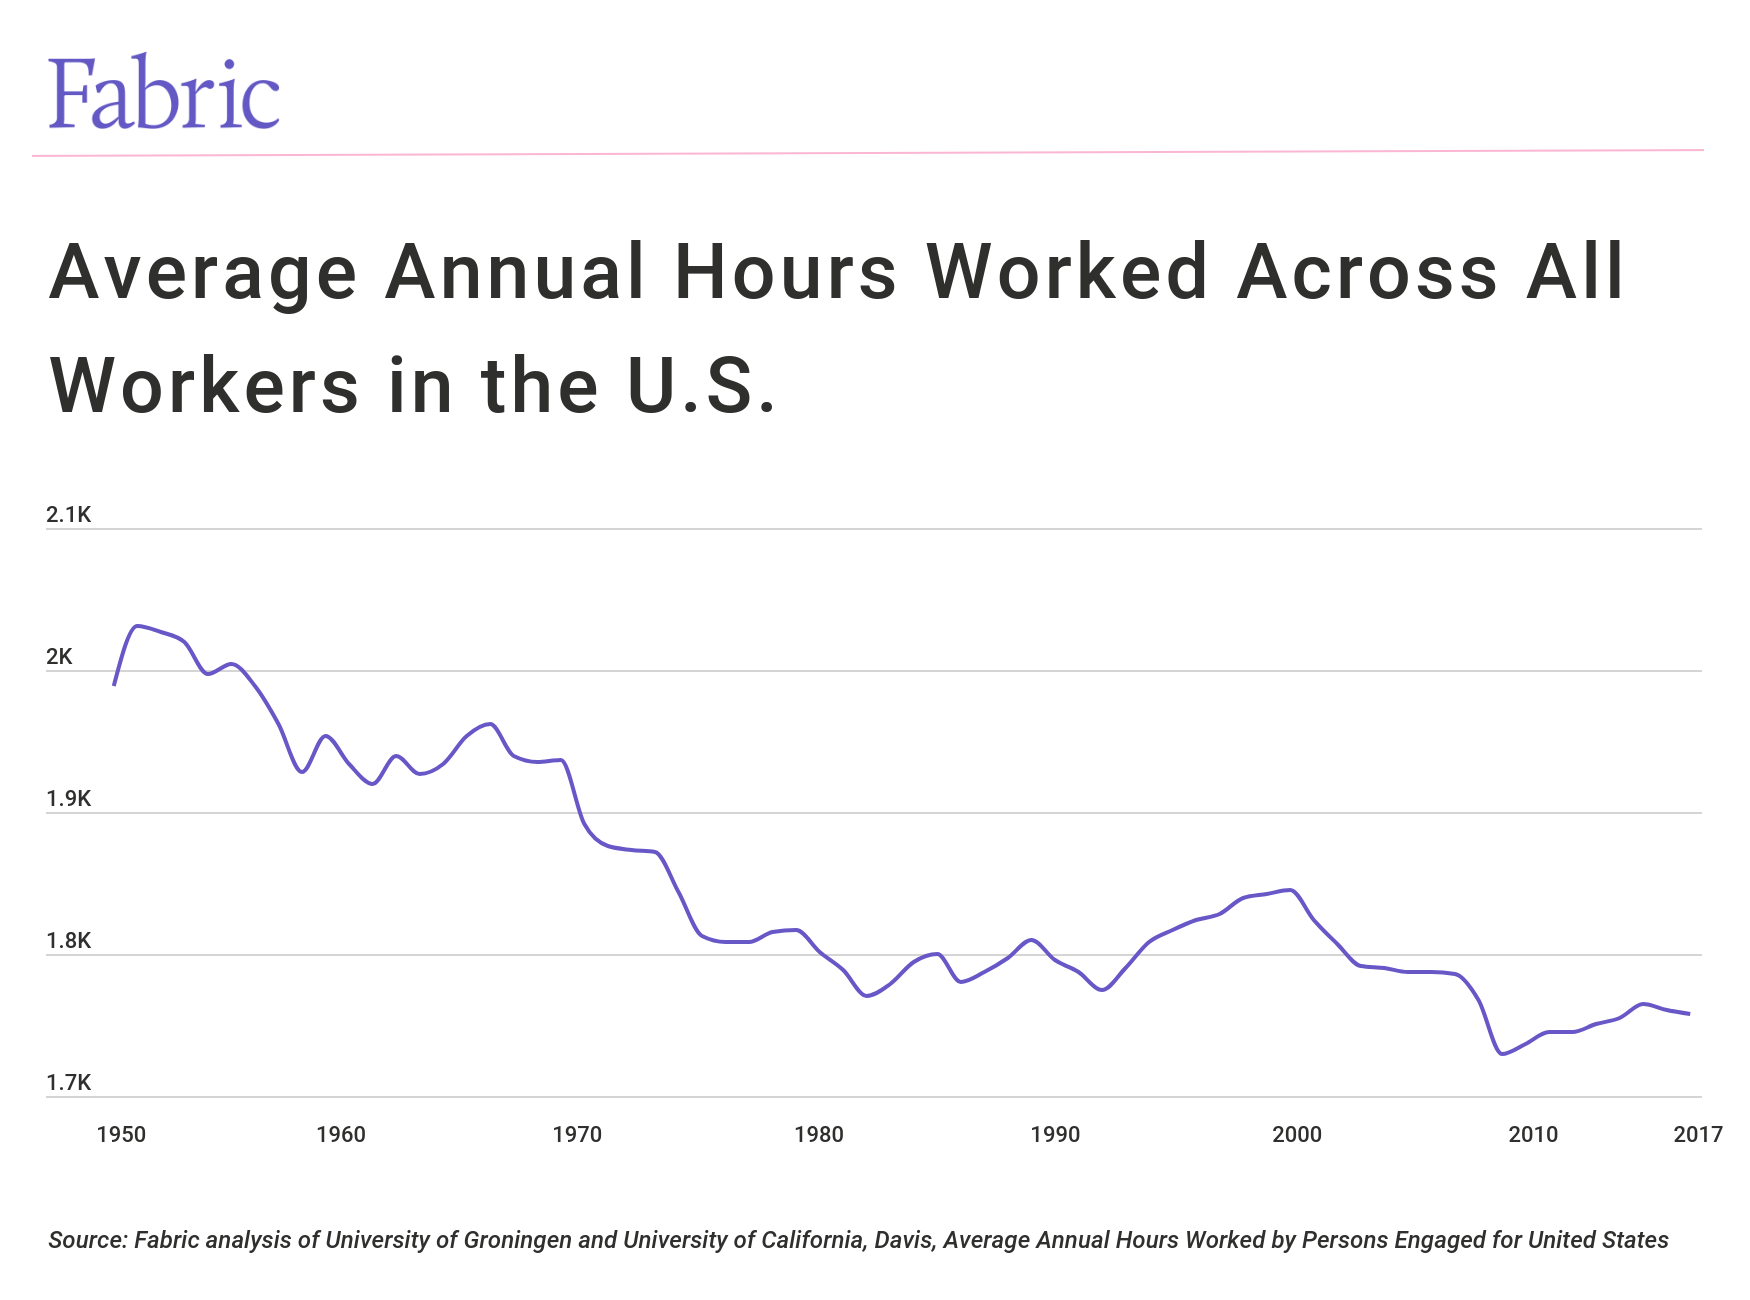 Americans are working fewer hours per year, on average, though their use of technology means they're bringing more work home with them